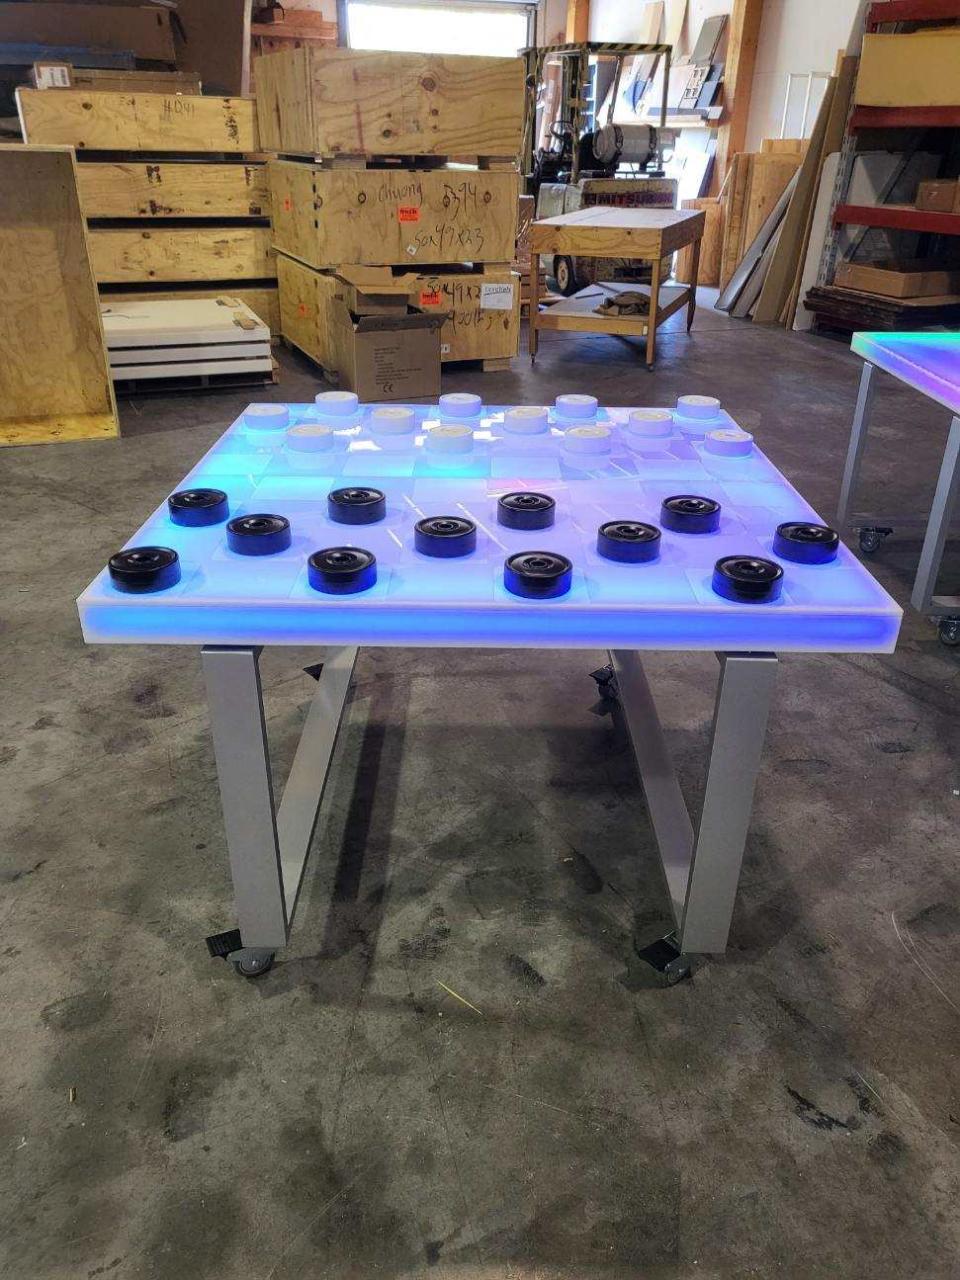 All sorts of lighted games are available.